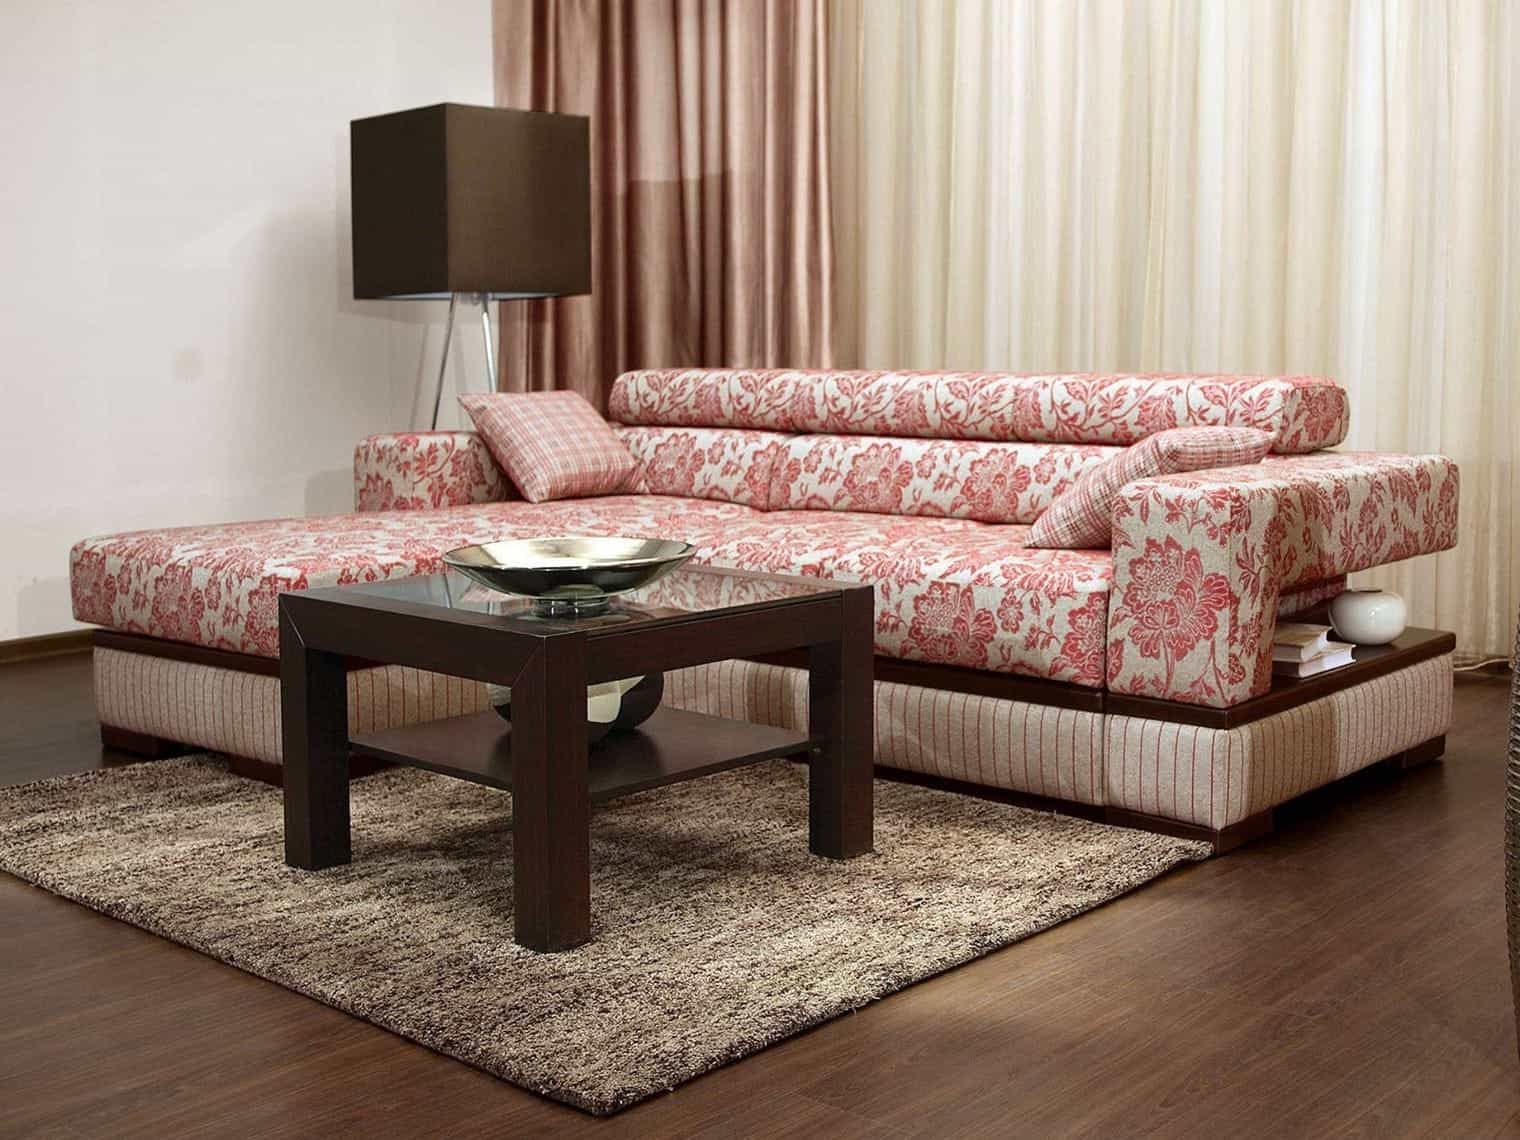 Featured Photo of L Shaped Sofa Modern Pink Floral Printed